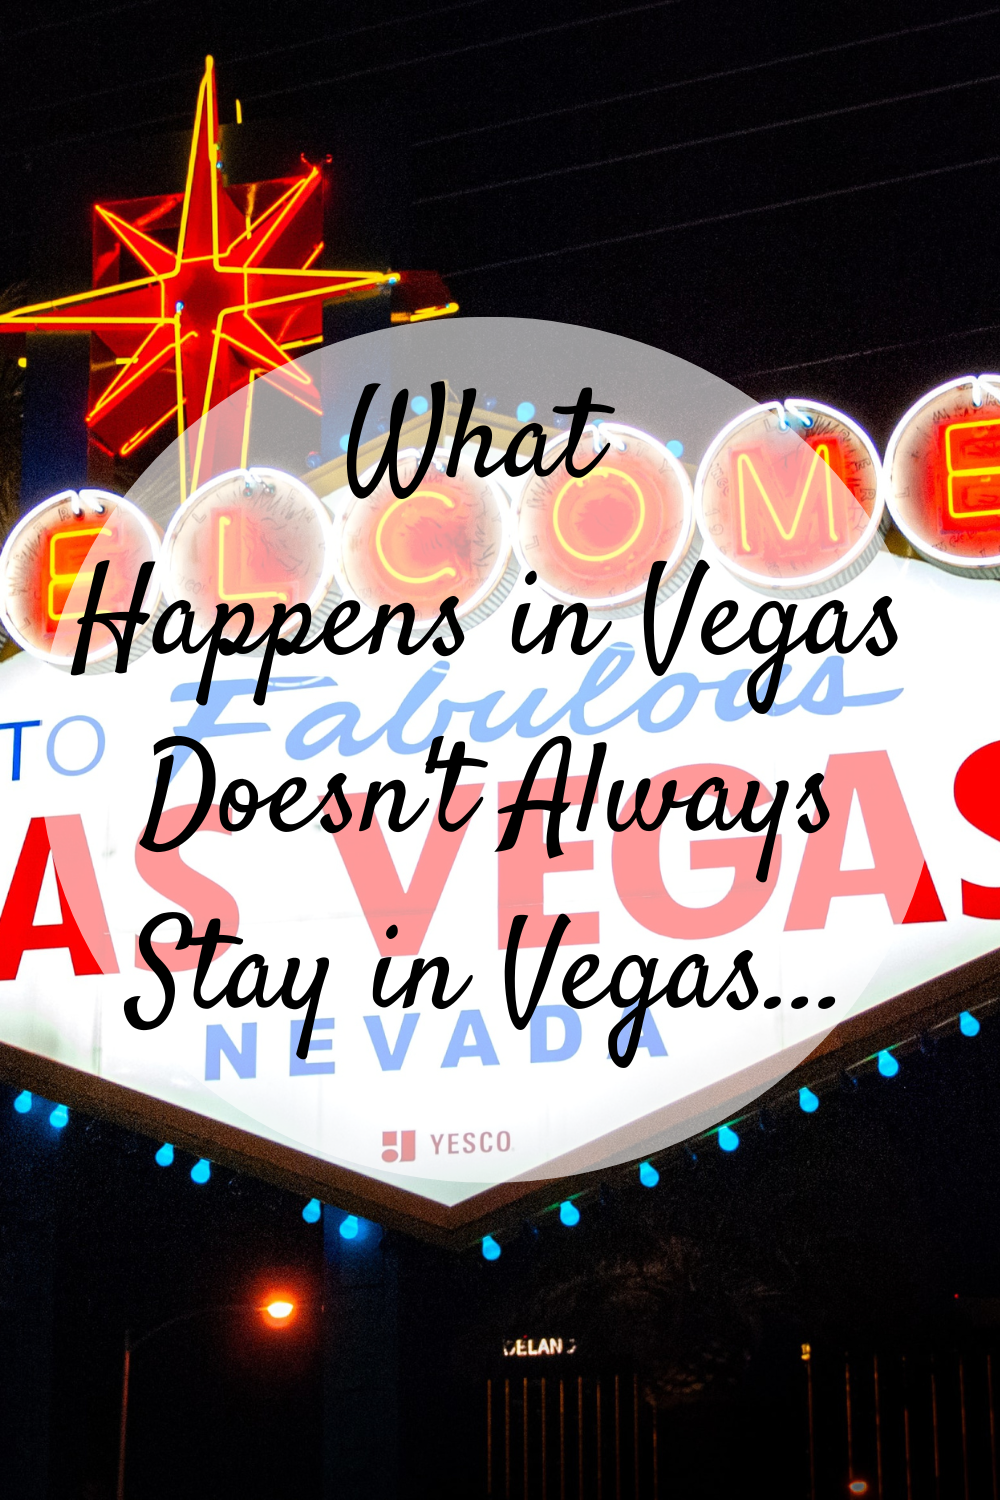 What happens in Las Vegas doesn't need to stay in Vegas